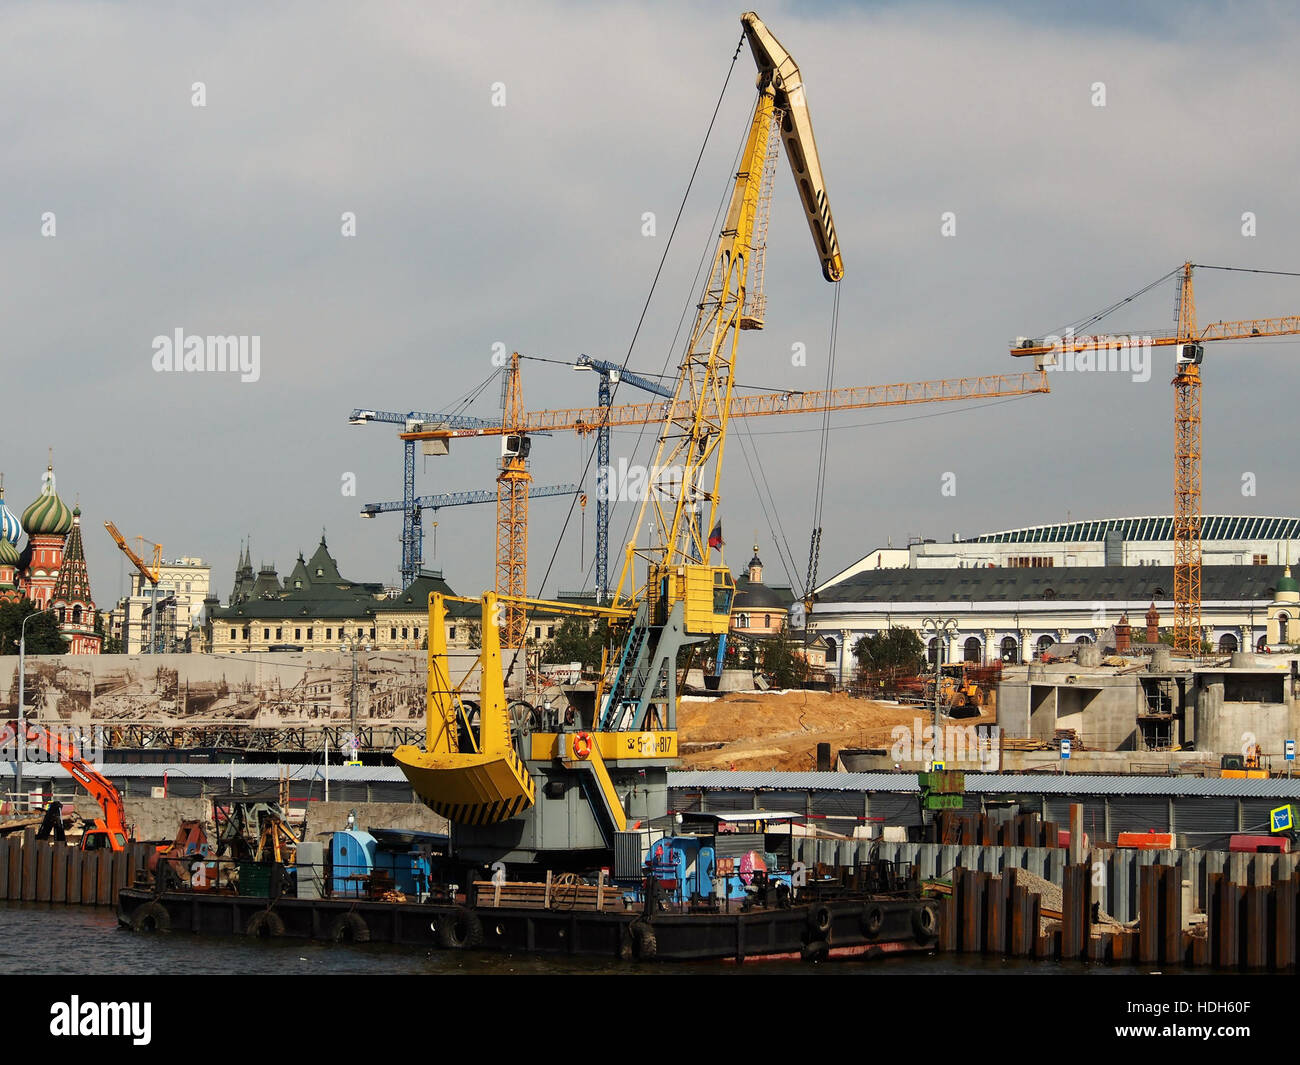 Crane barge No817 on the Moskva river pic1 Stock Photo